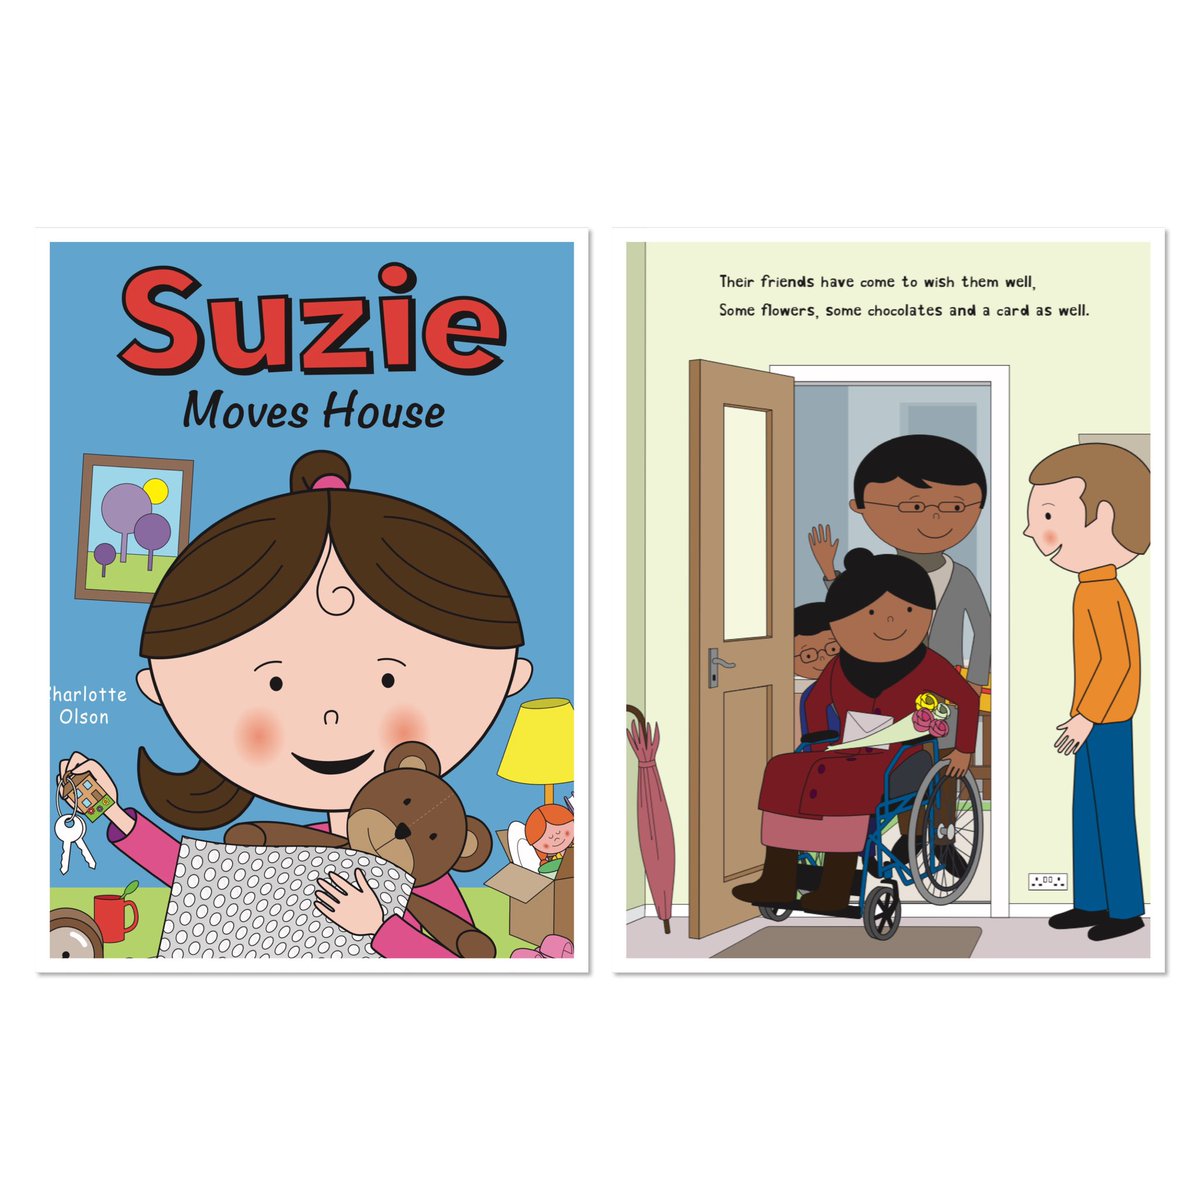 Moving House? Another challenging situation for many young children. Book 12 in the series. #Autism #Socialstories Take a look @PurplebricksUK @ConnellsEA @CJHole @knightfrank @OceanBristol @Rightmove @Savills @MaggsAllen @RHardingCSI @OnTheMarketCom @YopaProperty